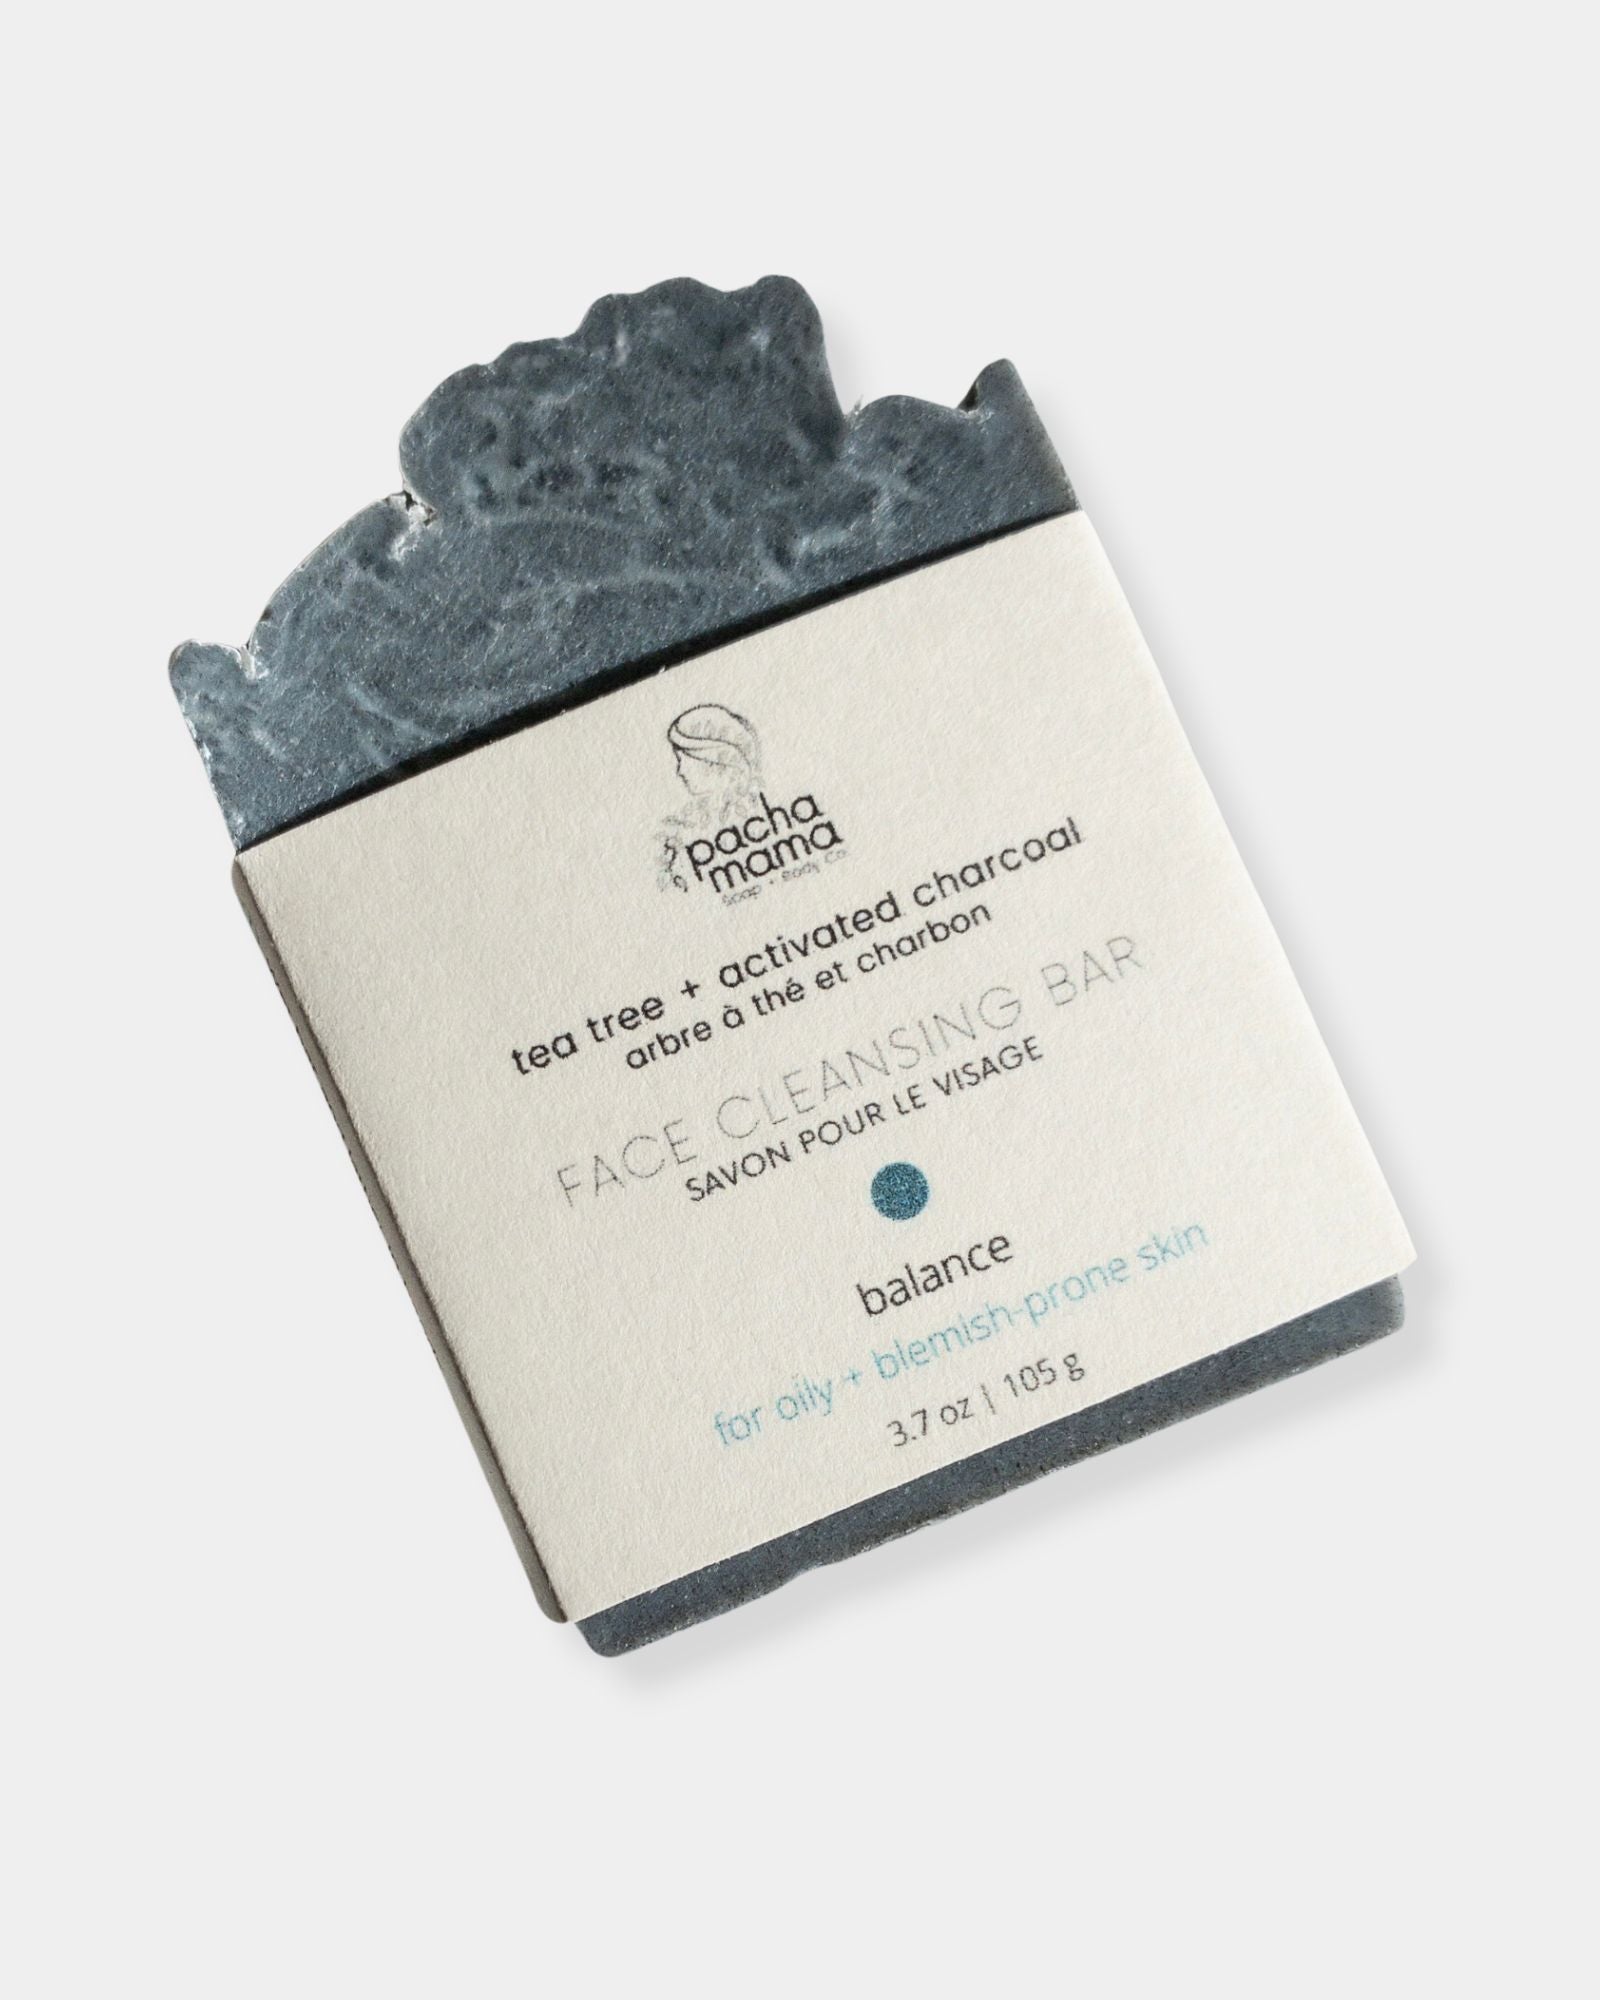 CHARCOAL & TEA TREE - FACE CLEANSING BAR